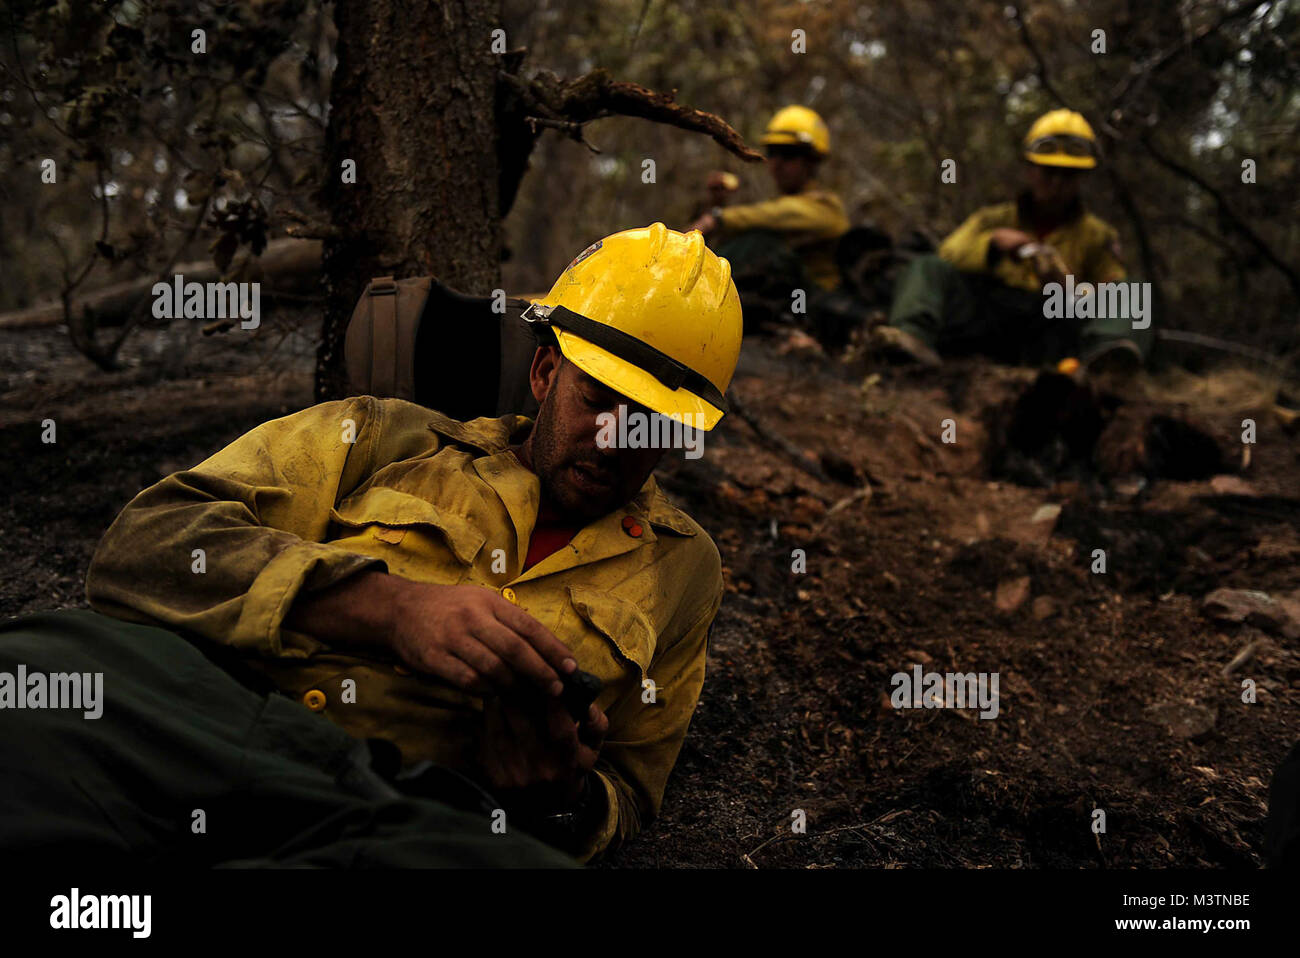 Vandenberg Air Force Base Hot Shot fire fighter Chris Loung looks at his phone during a team lunch break from cutting a fire line on June 28, 2012 in the Mount Saint Francois area of Colorado Springs, Co. while helping to battle several fires in Waldo Canyon.  The Waldo Canyon fire has grown to 18,500 acres and burned over 300 homes. Currently, more than 90 firefighters from the Academy, along with assets from Air Force Space Command; F.E. Warren Air Force Base, Wyo.; Fort Carson, Colo.; and the local community continue to fight the Waldo Canyon fire.(U.S. Air Force Photo by: Master Sgt. Jerem Stock Photo